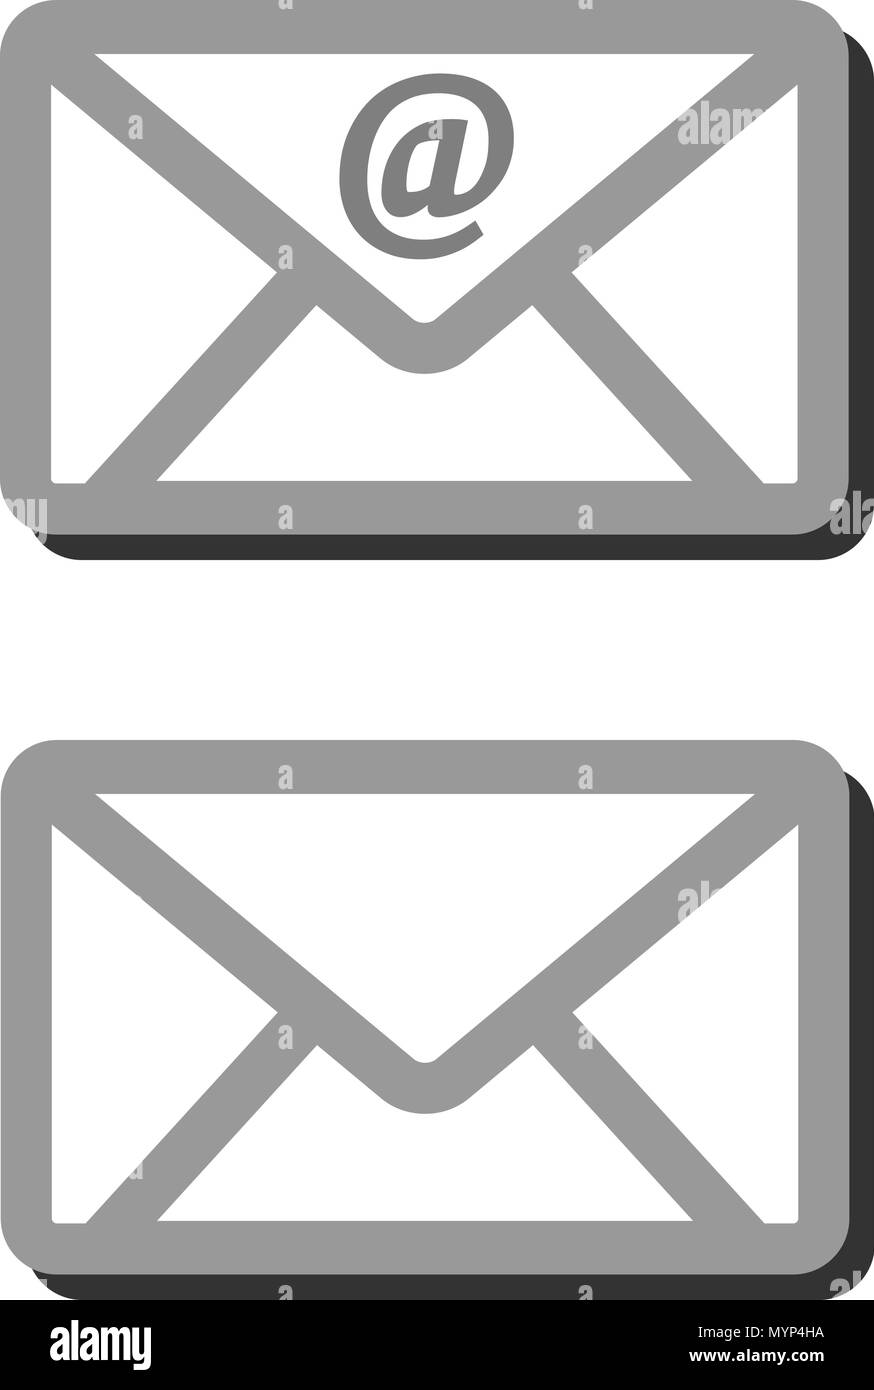 Email envelope sign Stock Vector